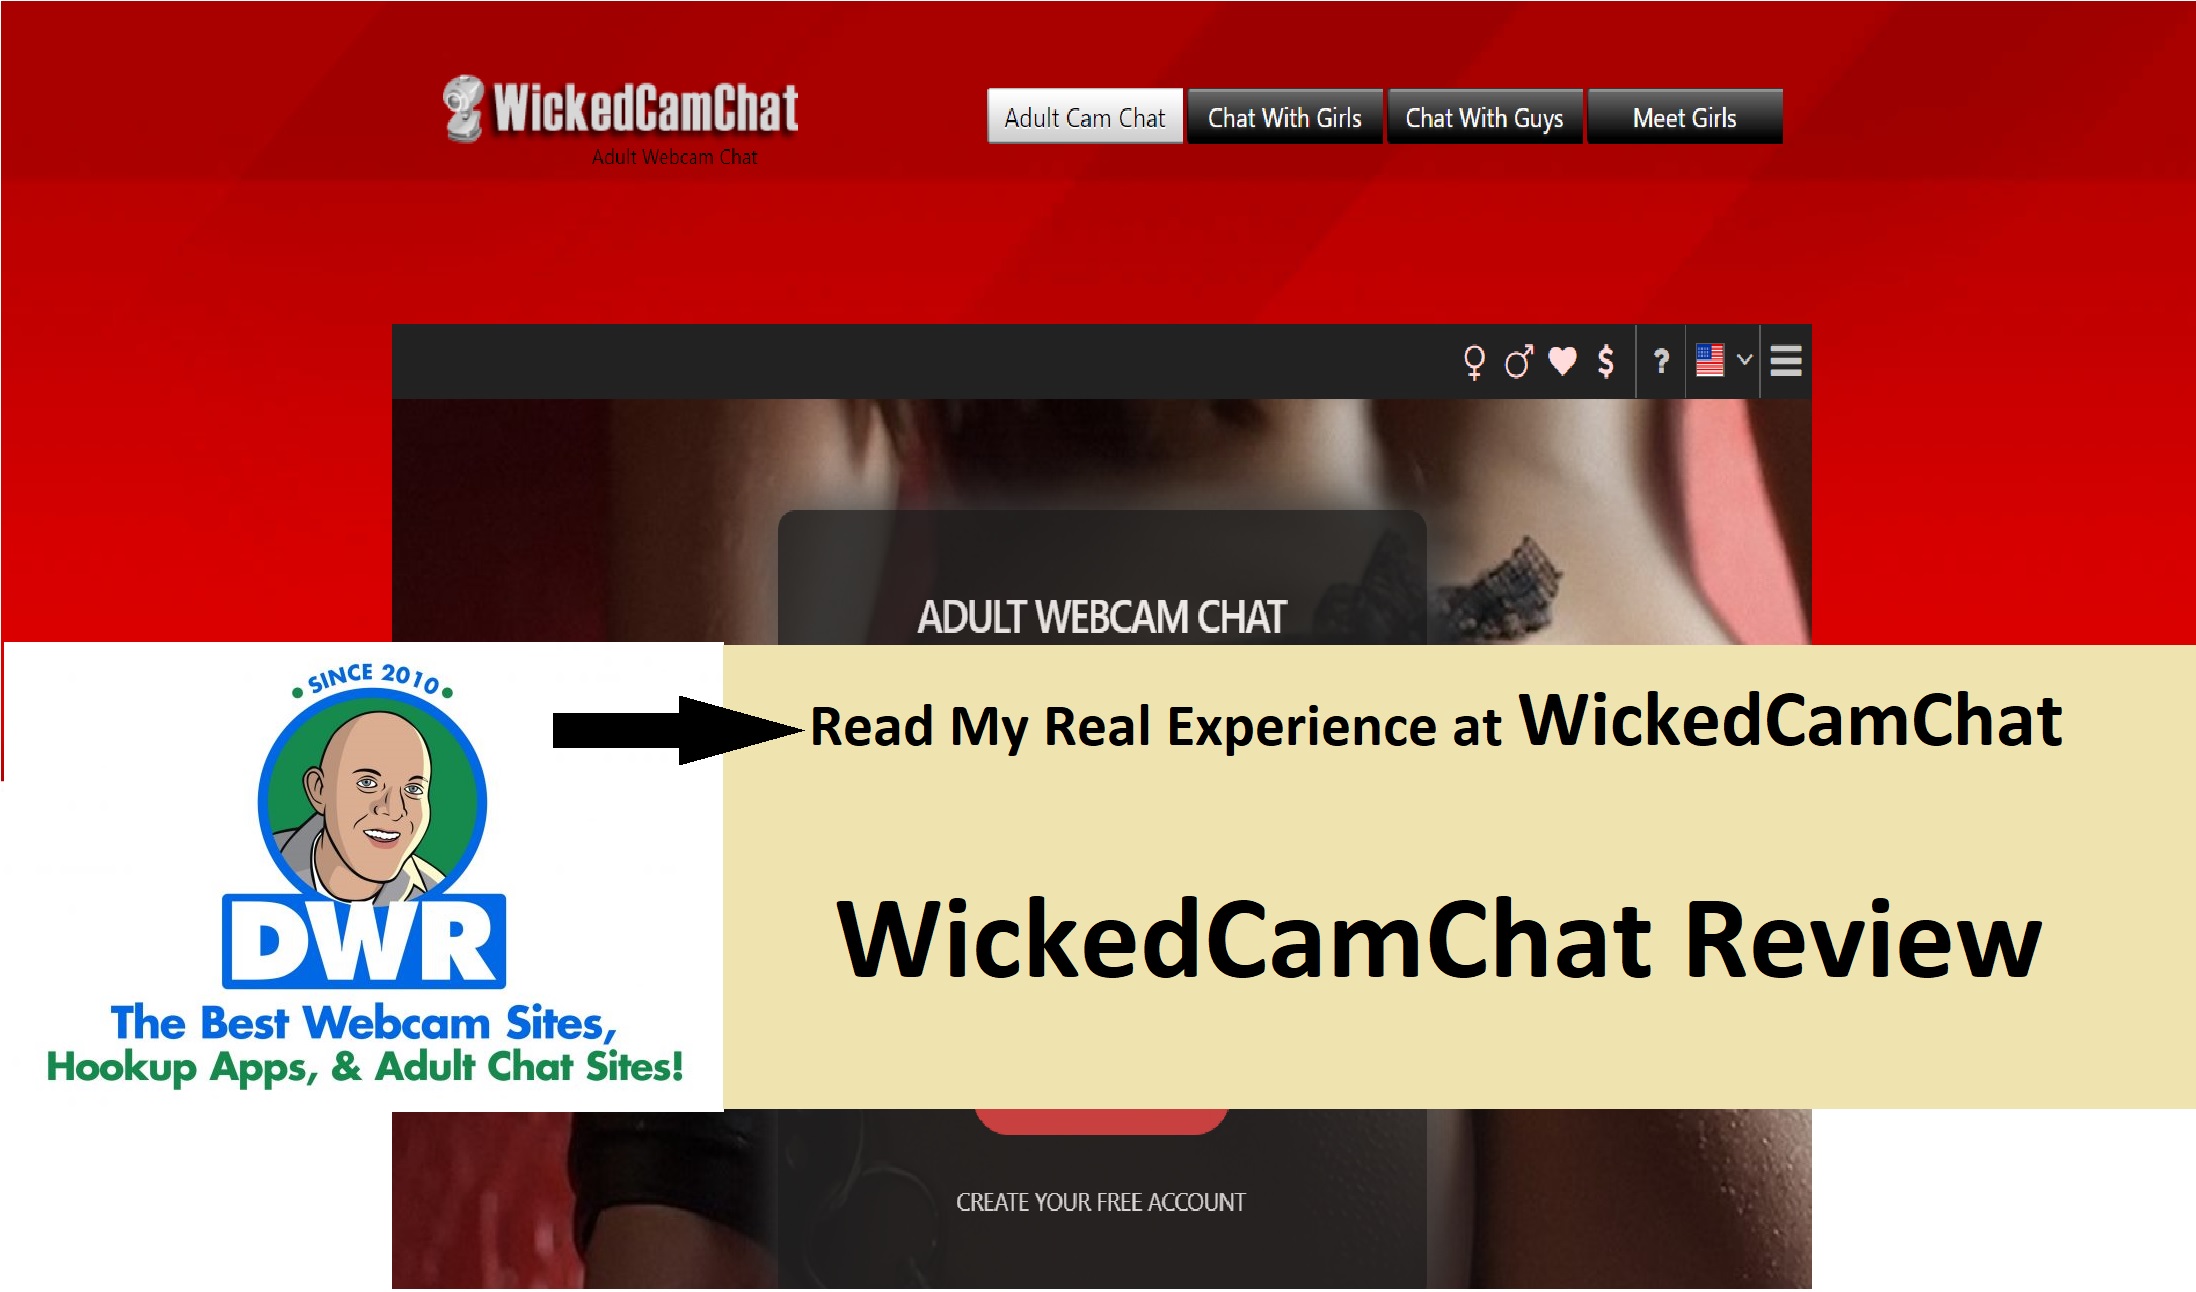 Wickedcam chat